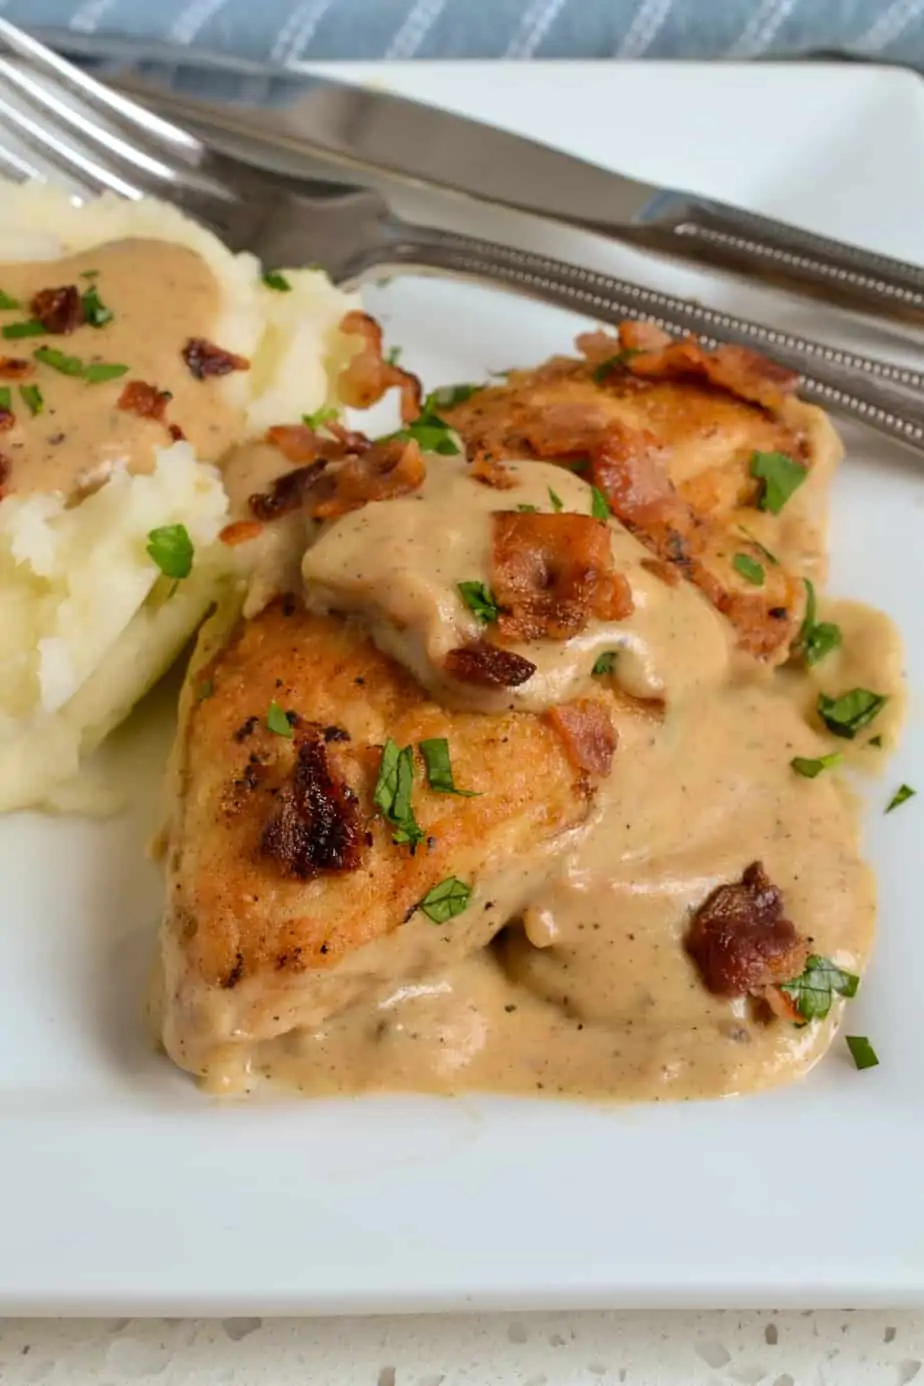 A plate of southern style smothered chicken with gravy